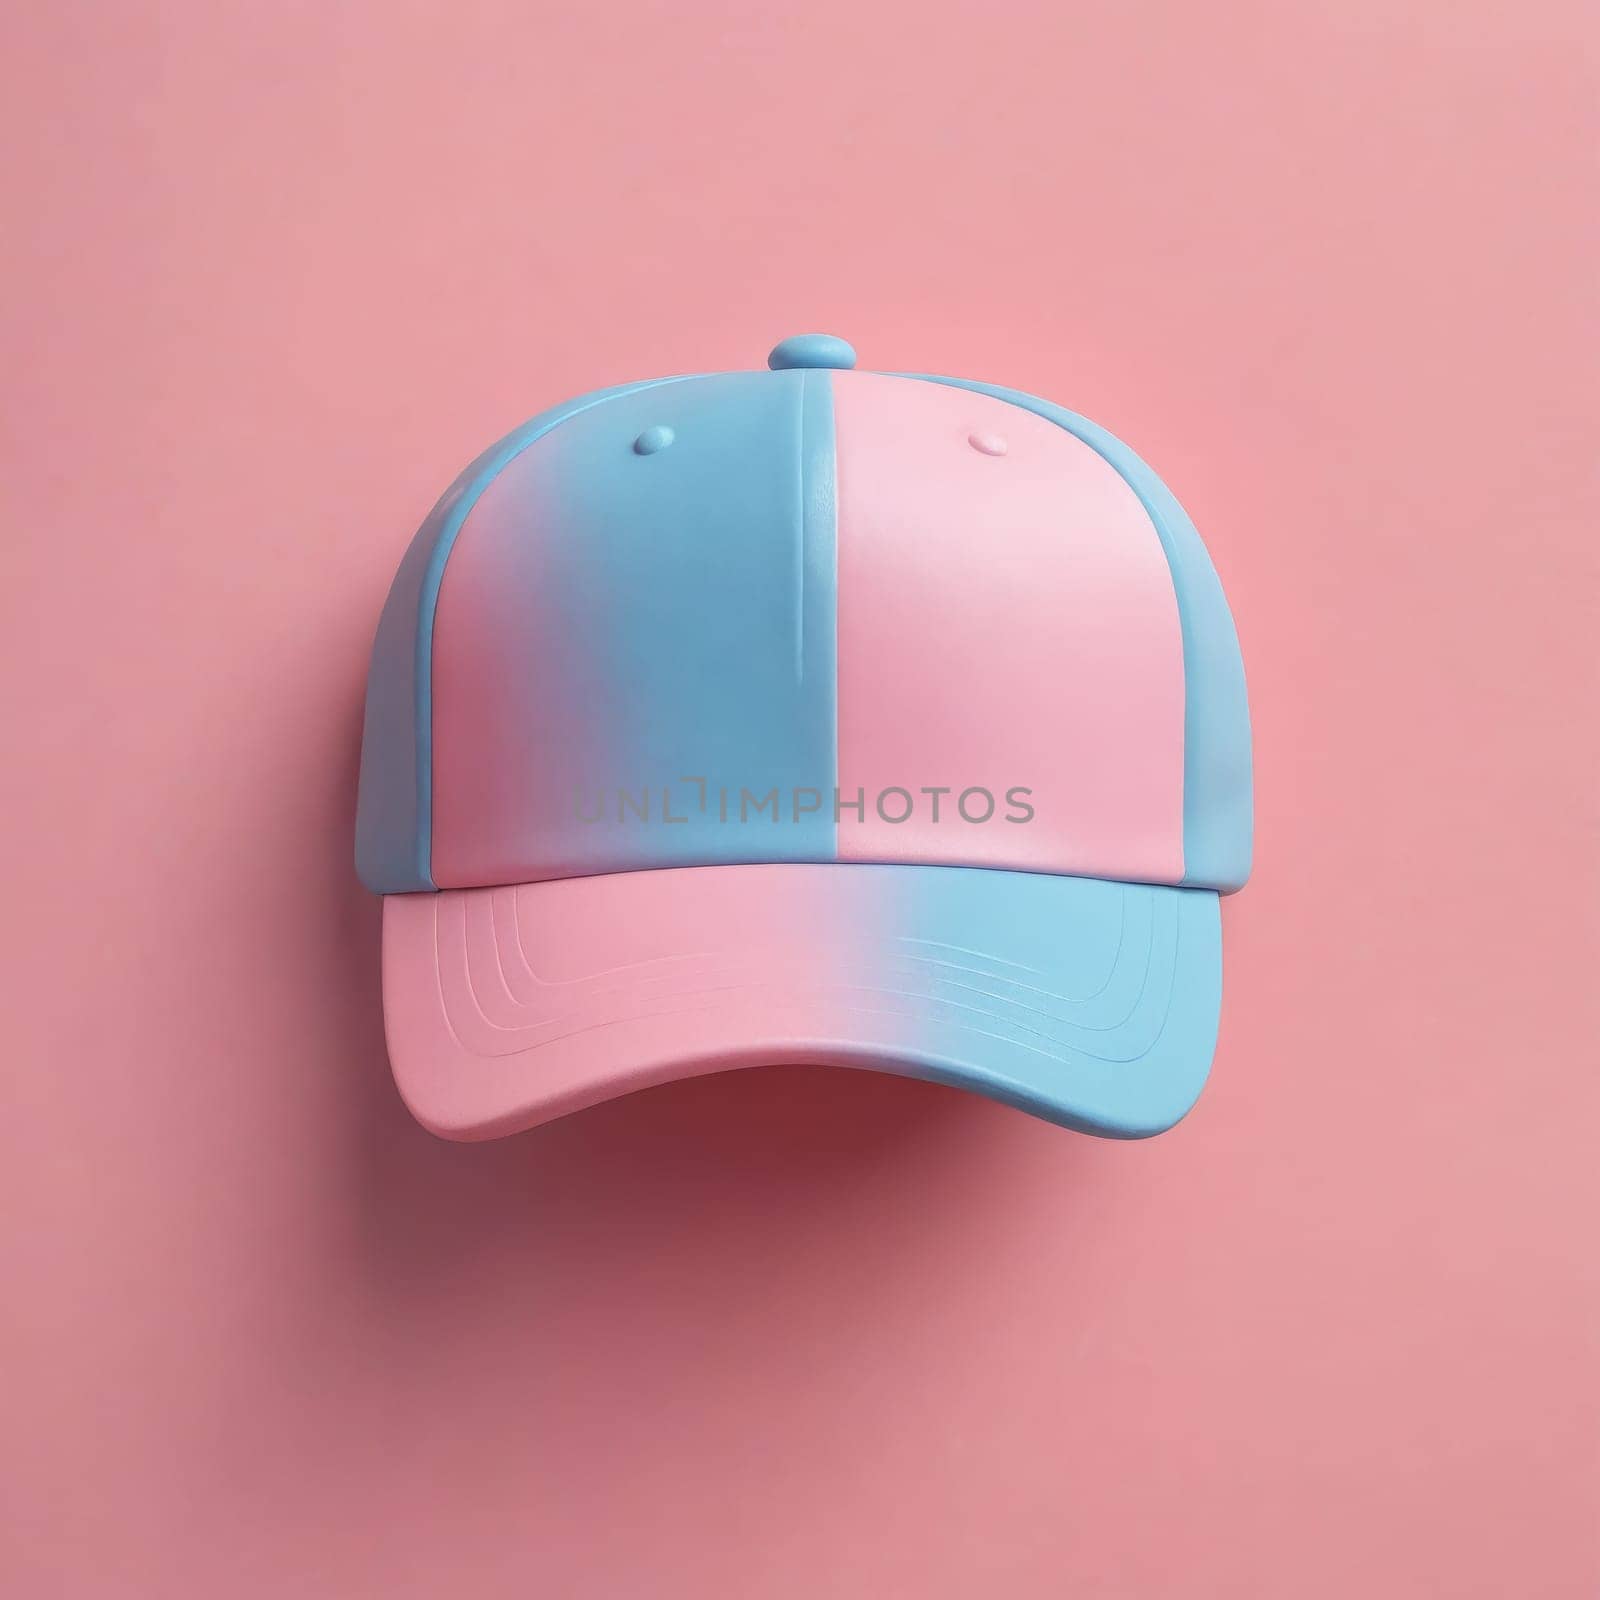 A magenta and electric blue baseball cap is displayed on a pink background. The headgear is made of plastic and serves as personal protective equipment